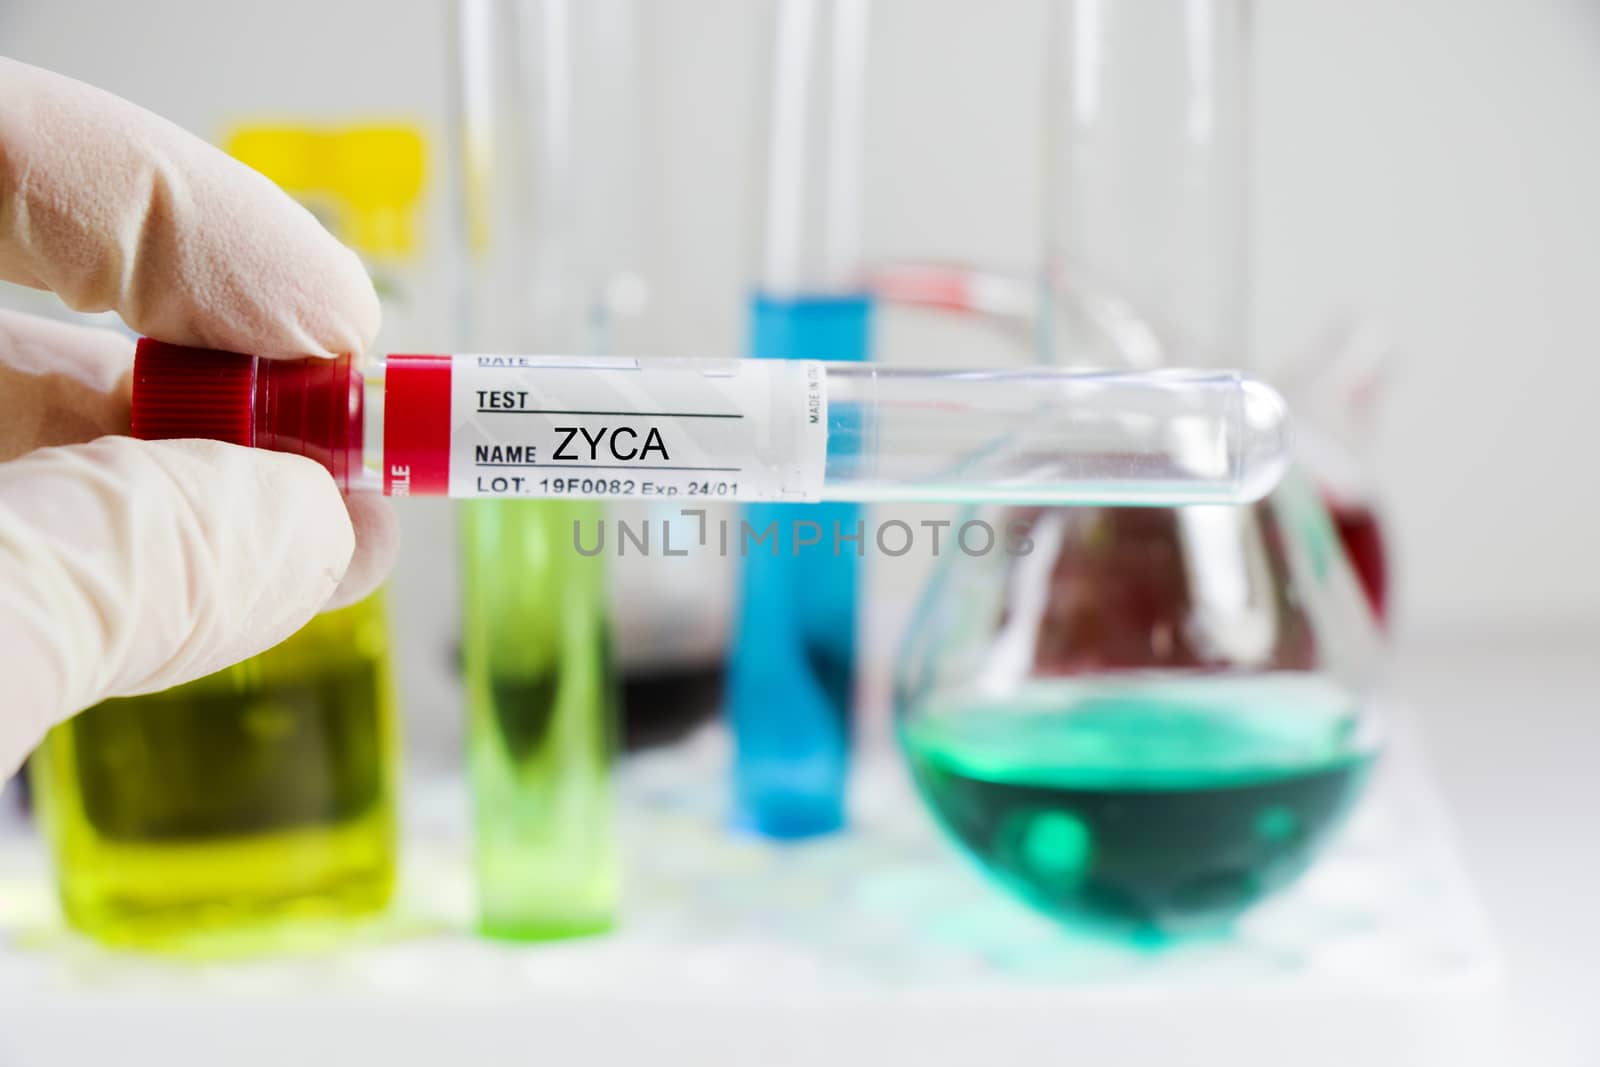 Zyca virus, blood test tube samples, laboratory and chemical liquid elements, cocci by Taidundua